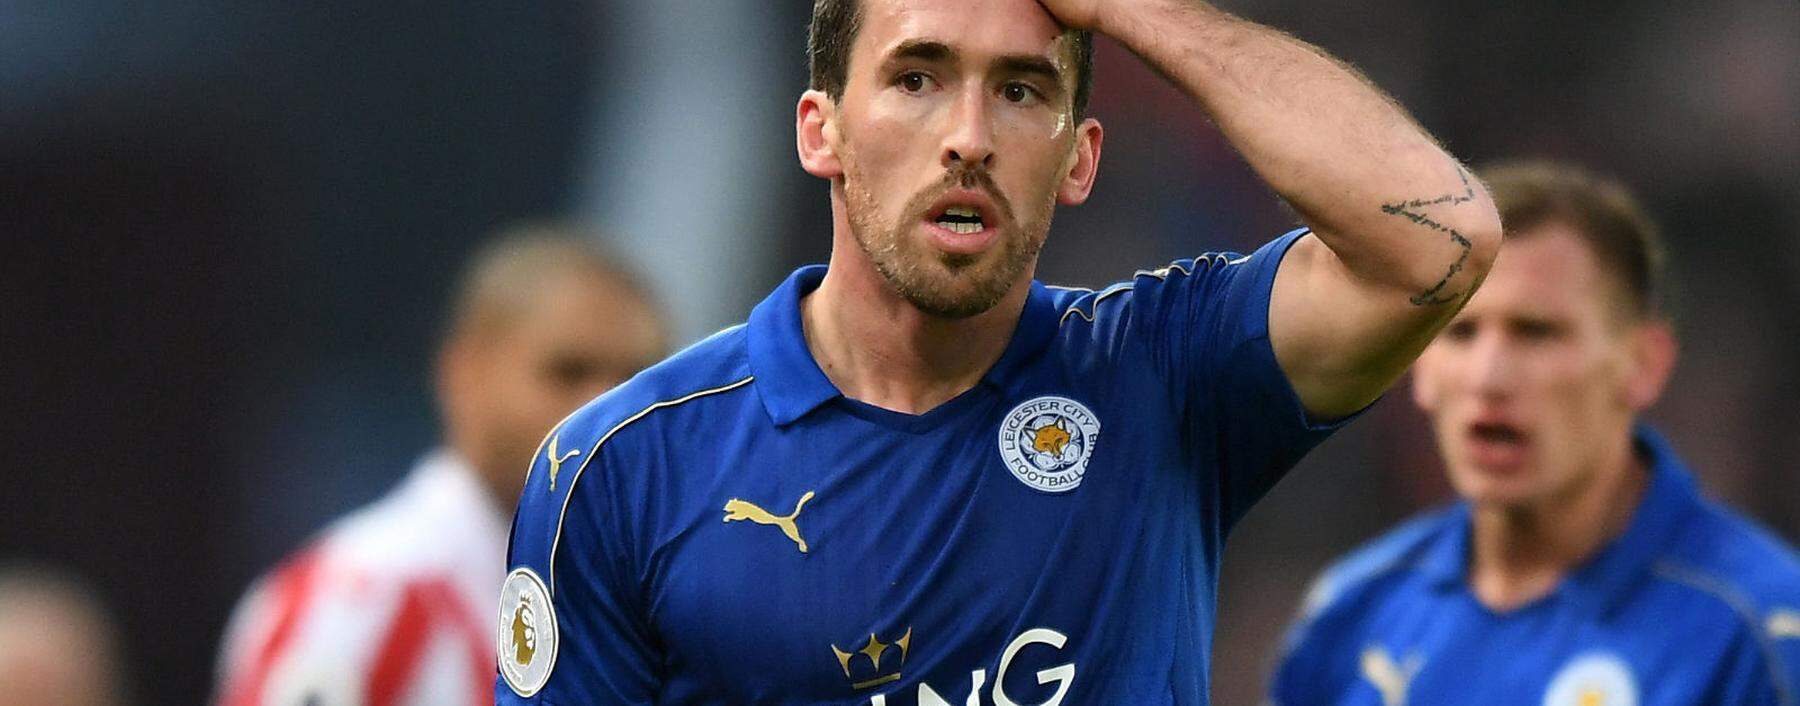 Leicester City's Christian Fuchs looks dejected